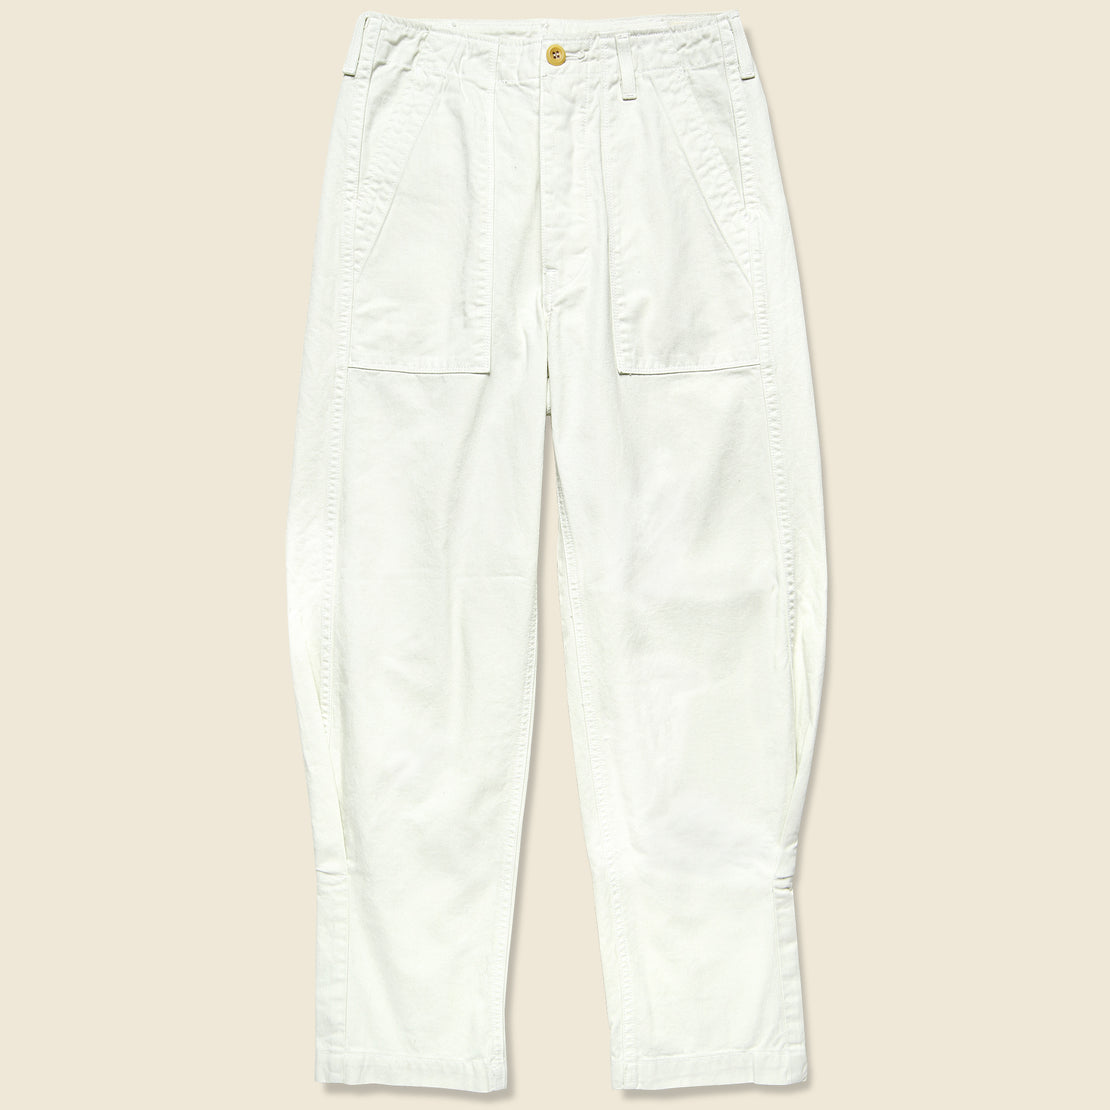 Imogene + Willie Palmore Twill Pant - Natural